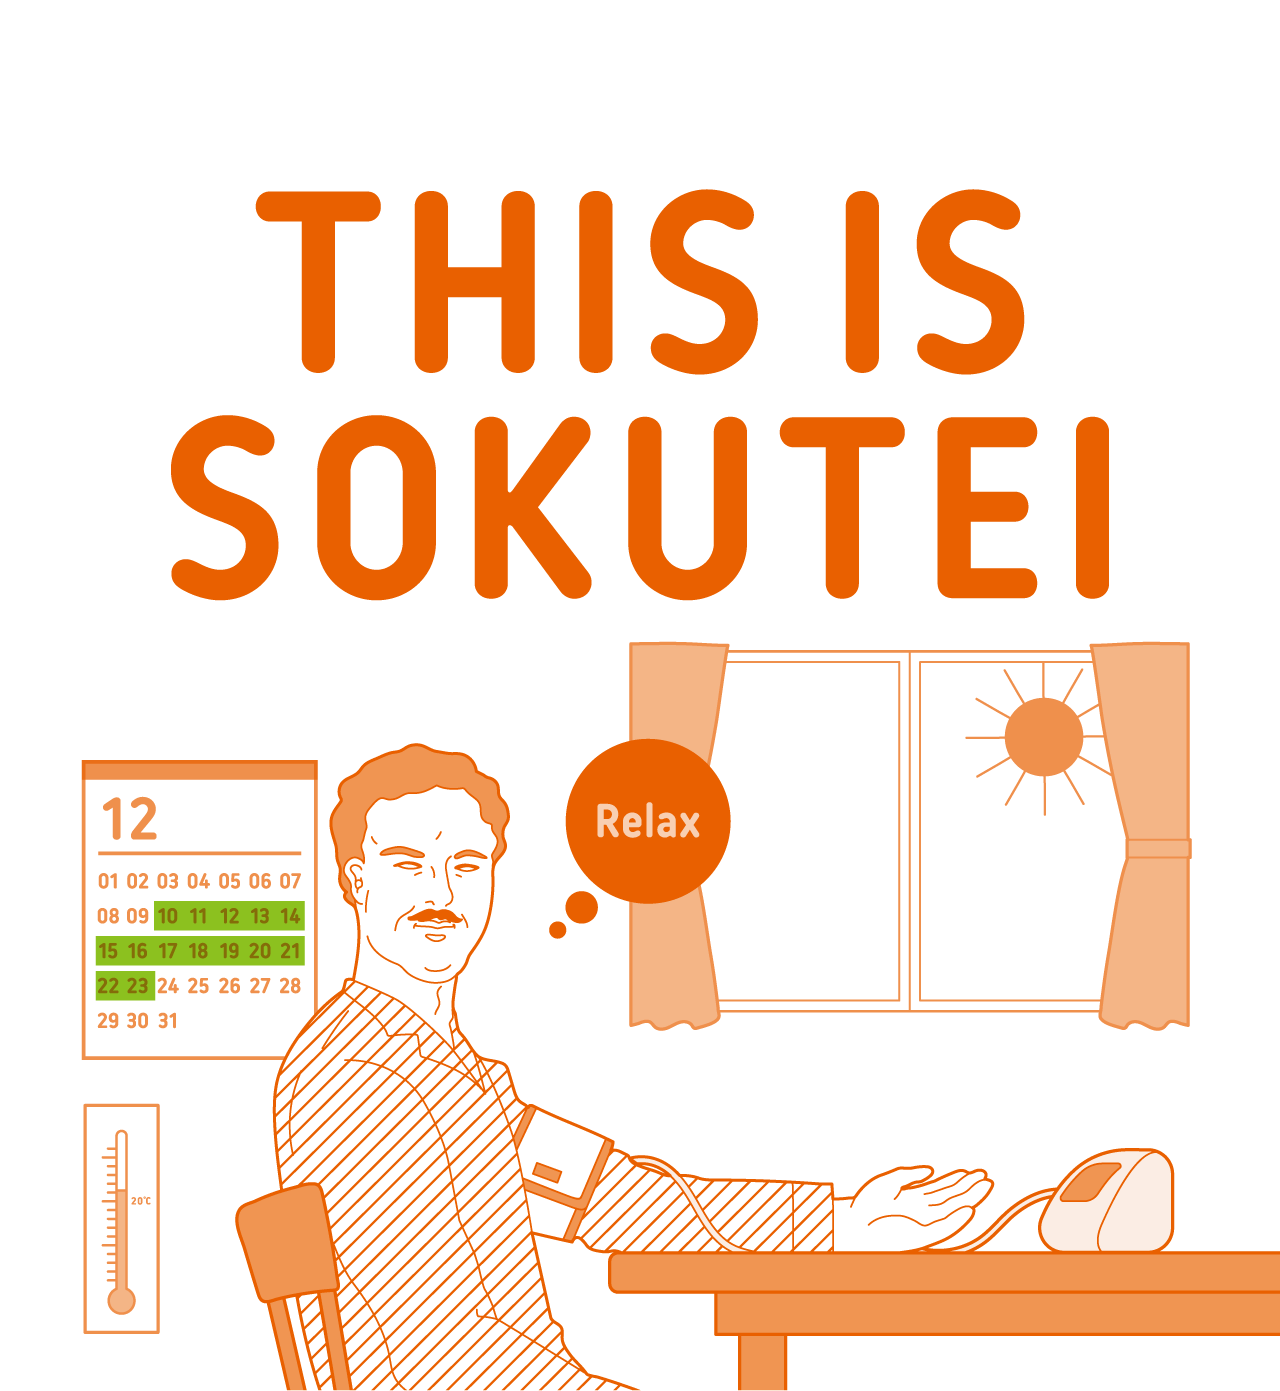 THIS IS SOKUTEI